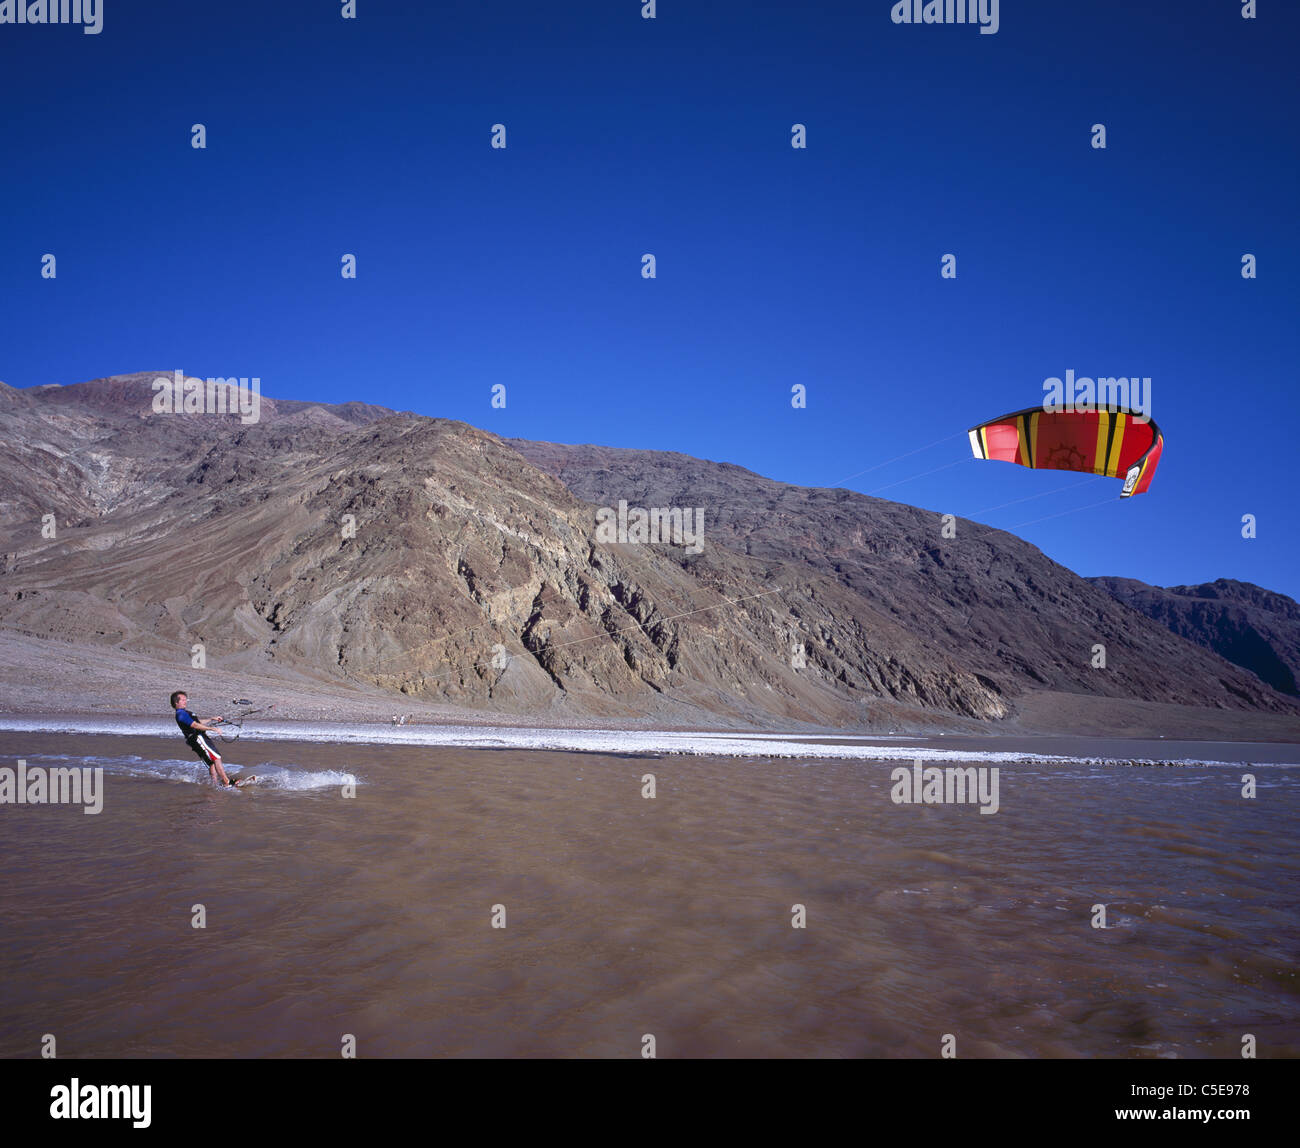 Kitesurfing in one of in one of the most unexpected places on earth. in 2005, Death Valley National Park saw a record rainfall. California, USA. Stock Photo